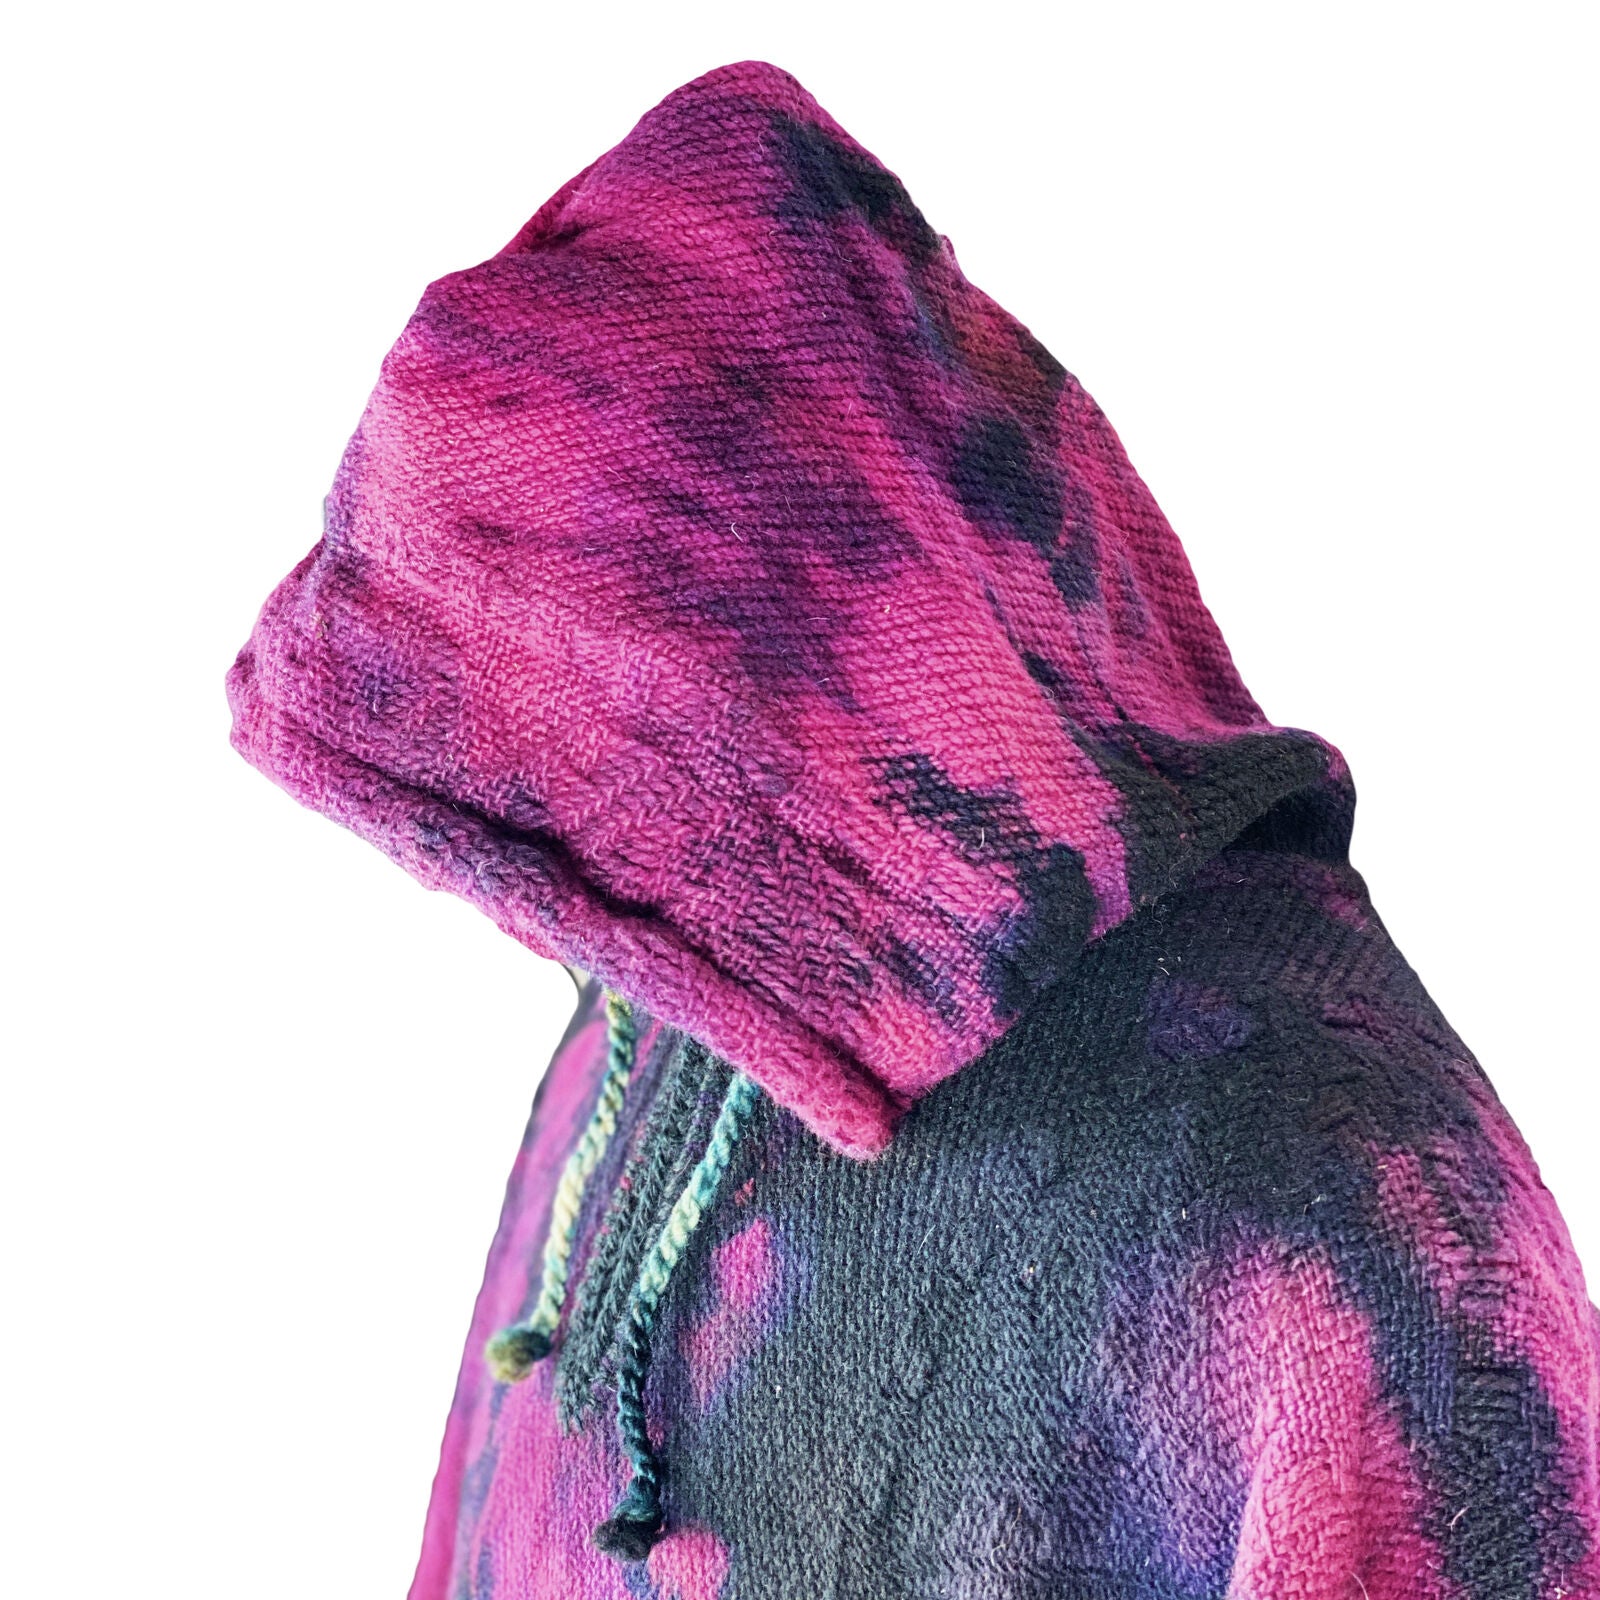 Llama Wool Unisex South American Handwoven Hooded Poncho - black/purple/blue/red abstract pattern